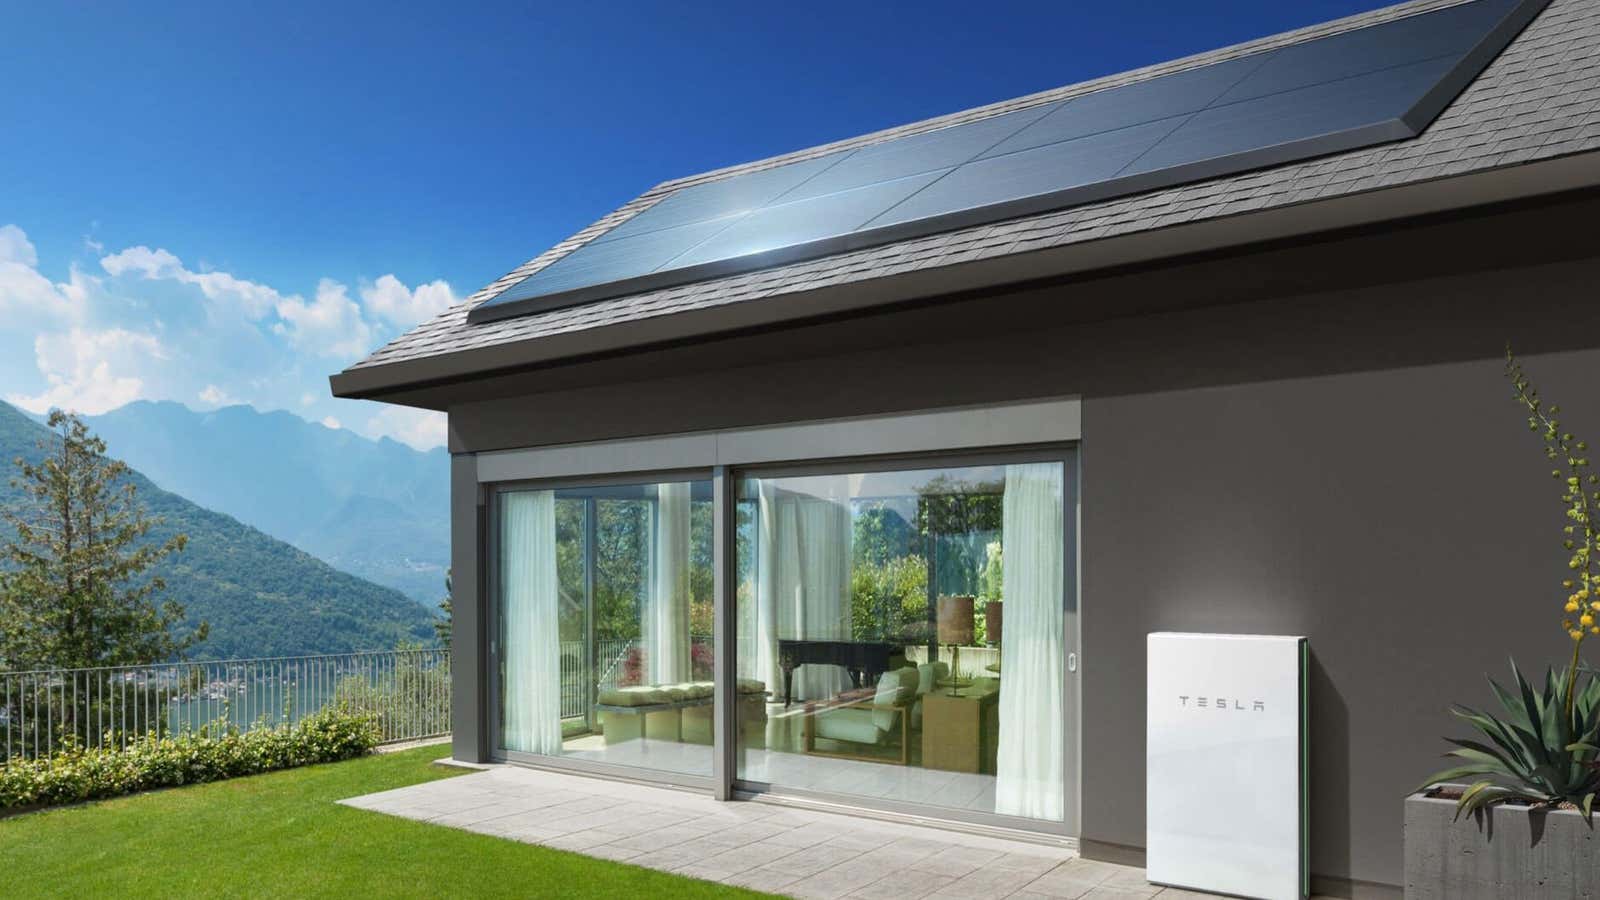 Tesla wants to be on your roof too.